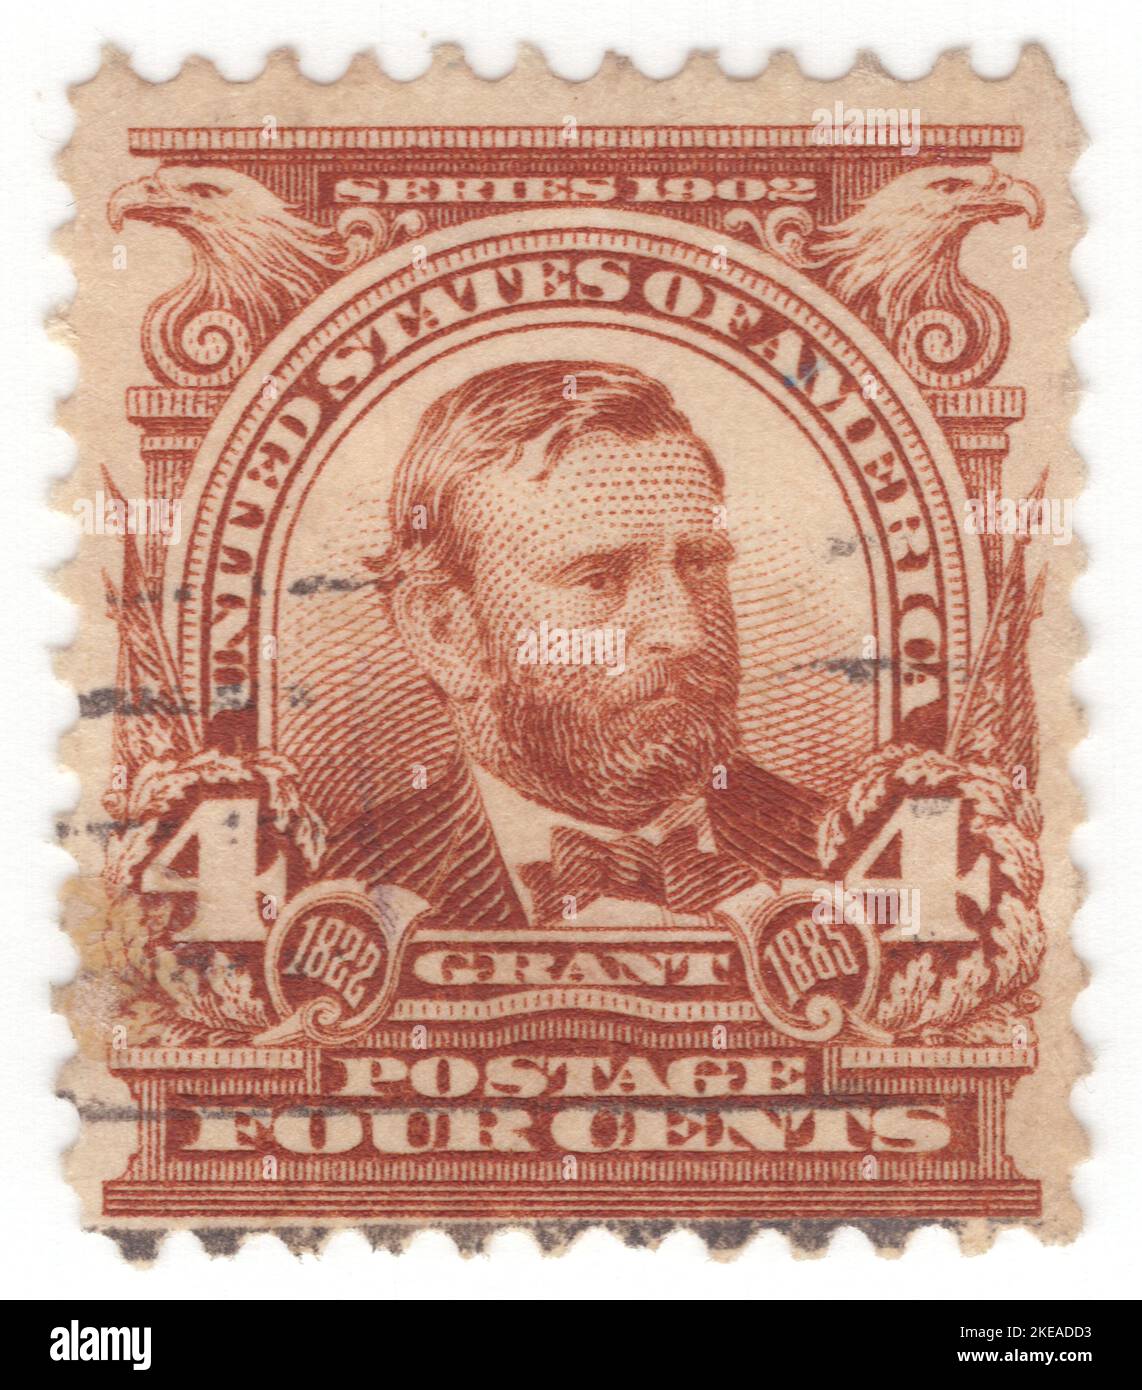 USA - 1903: An 4 cents brown postage stamp depicting portrait of Ulysses S. Grant (born Hiram Ulysses Grant), American military officer and politician who served as the 18th president of the United States from 1869 to 1877. As Commanding General, he led the Union Army to victory in the American Civil War in 1865 and thereafter briefly served as Secretary of War. Later, as president, Grant was an effective civil rights executive who signed the bill that created the Justice Department and worked with Radical Republicans to protect African Americans during Reconstruction Stock Photo